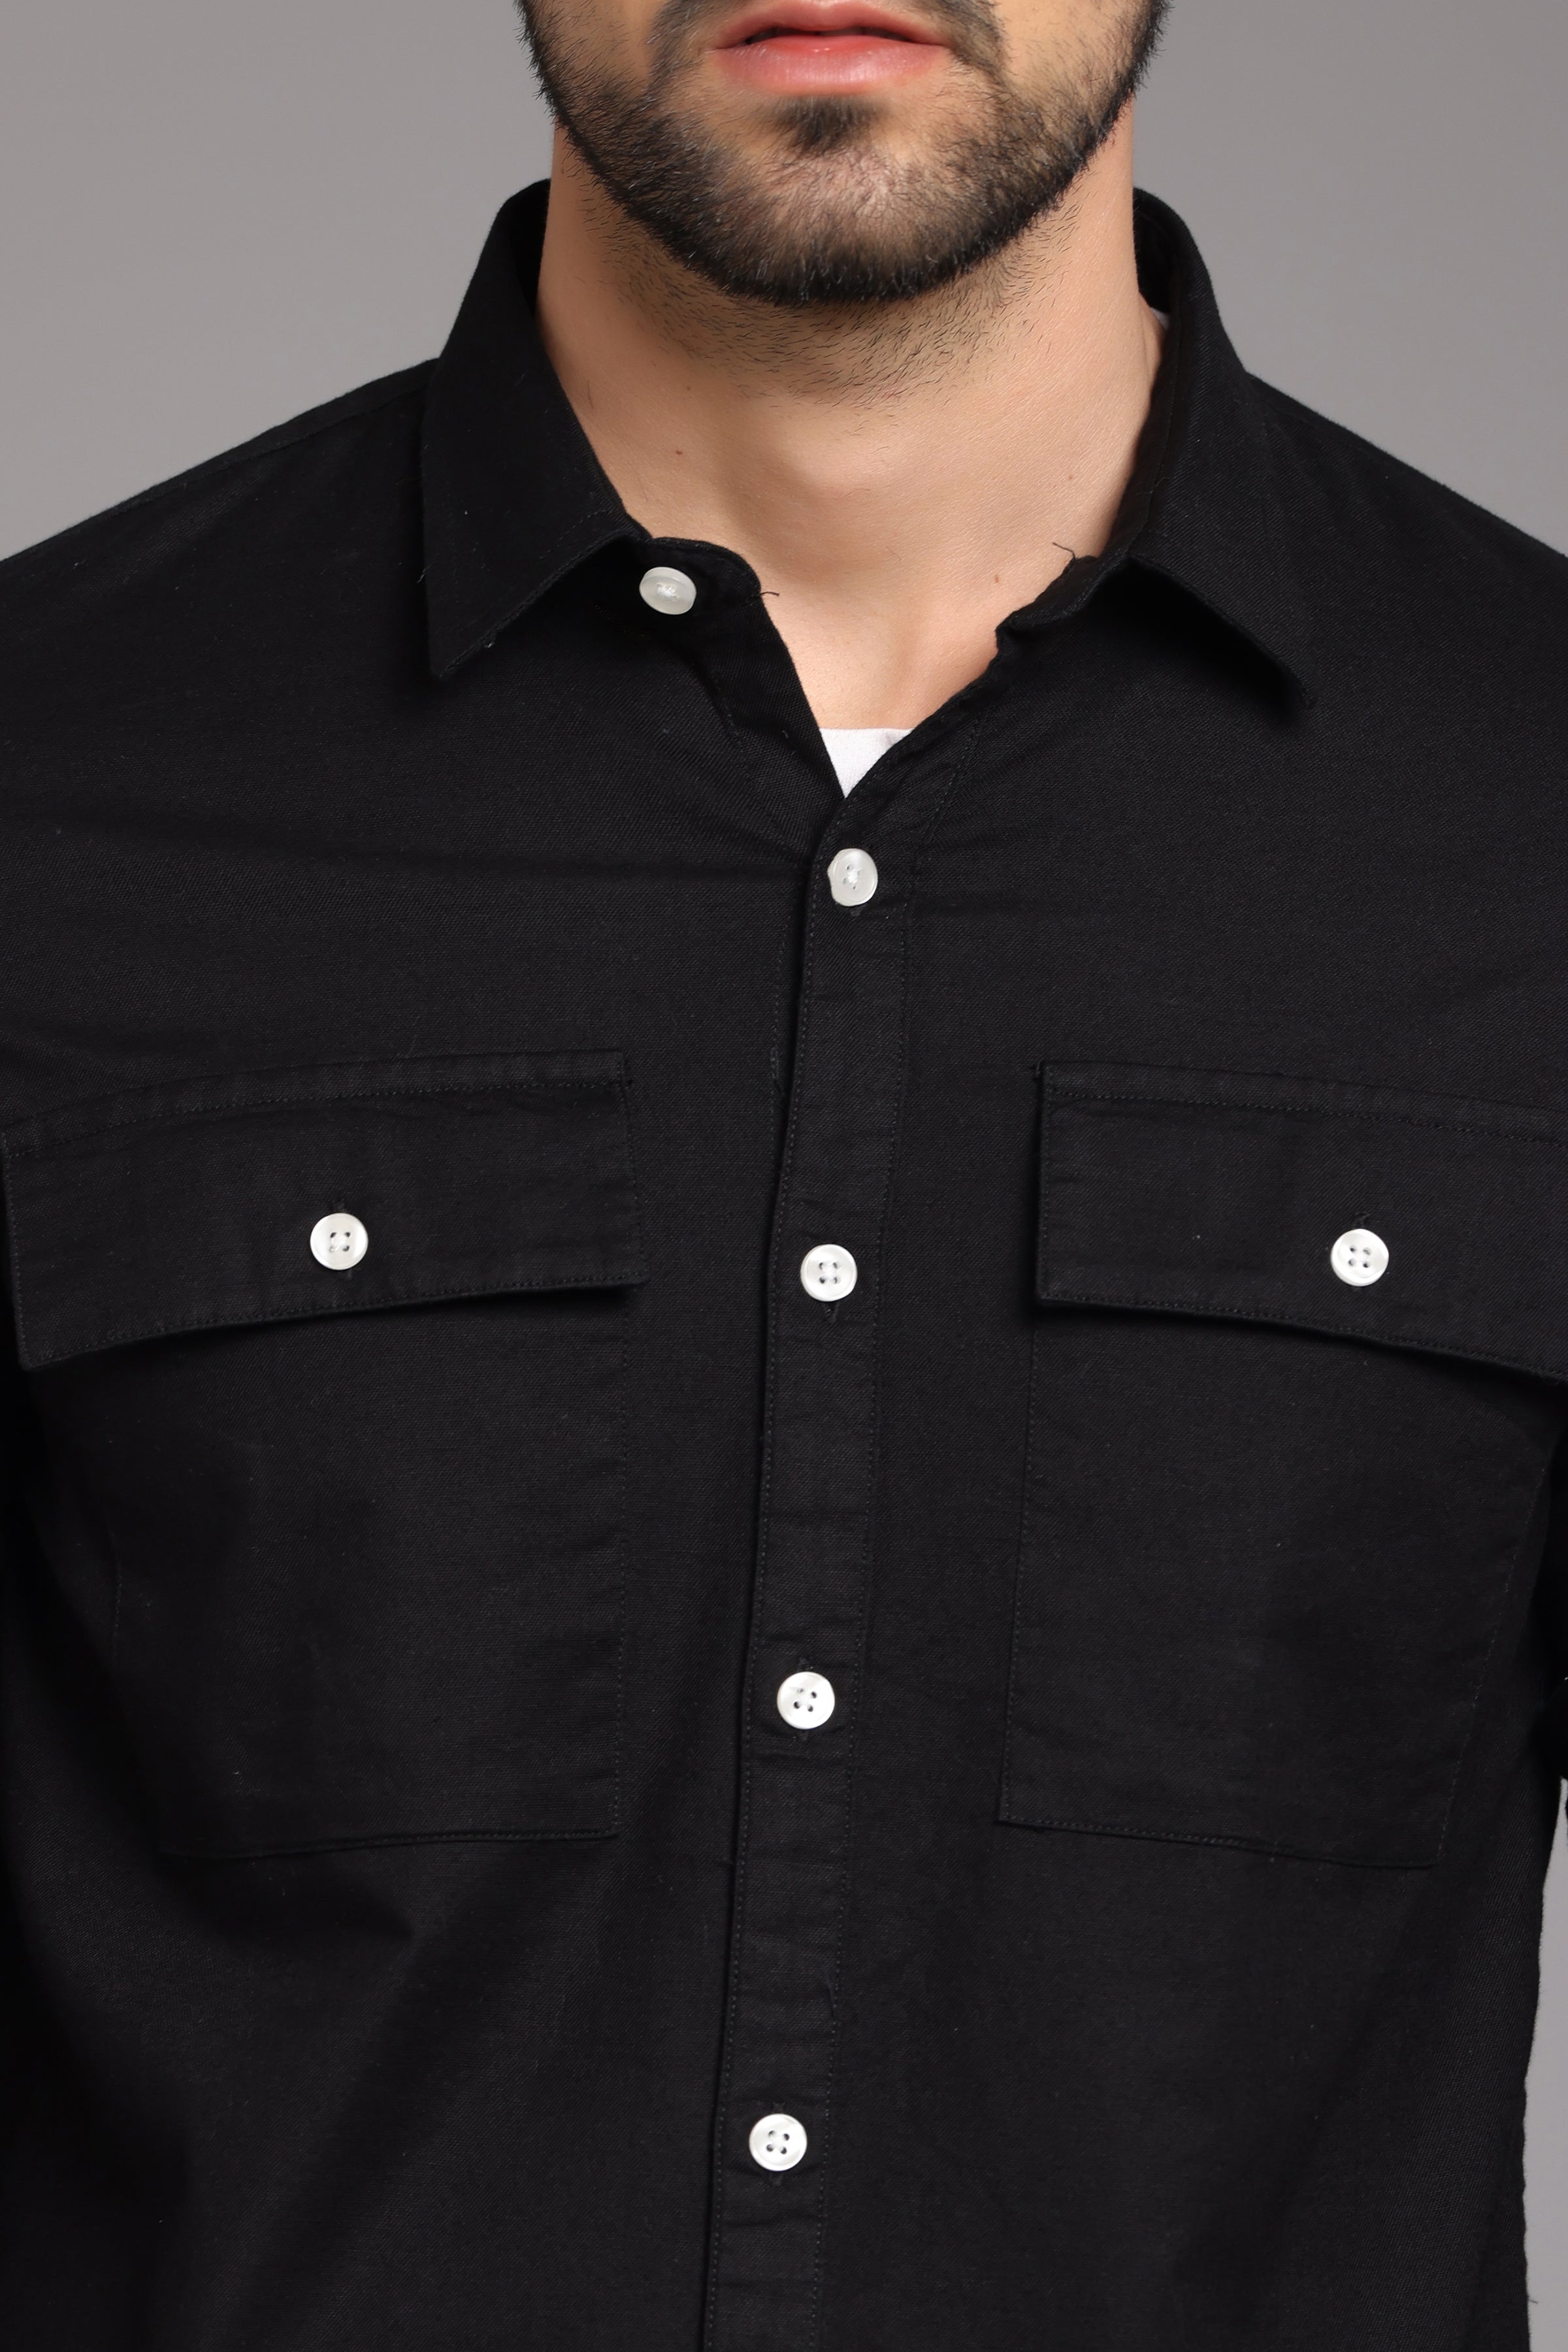 Black Full Sleeve Shirt with Double Pocket Shirts Project 30 